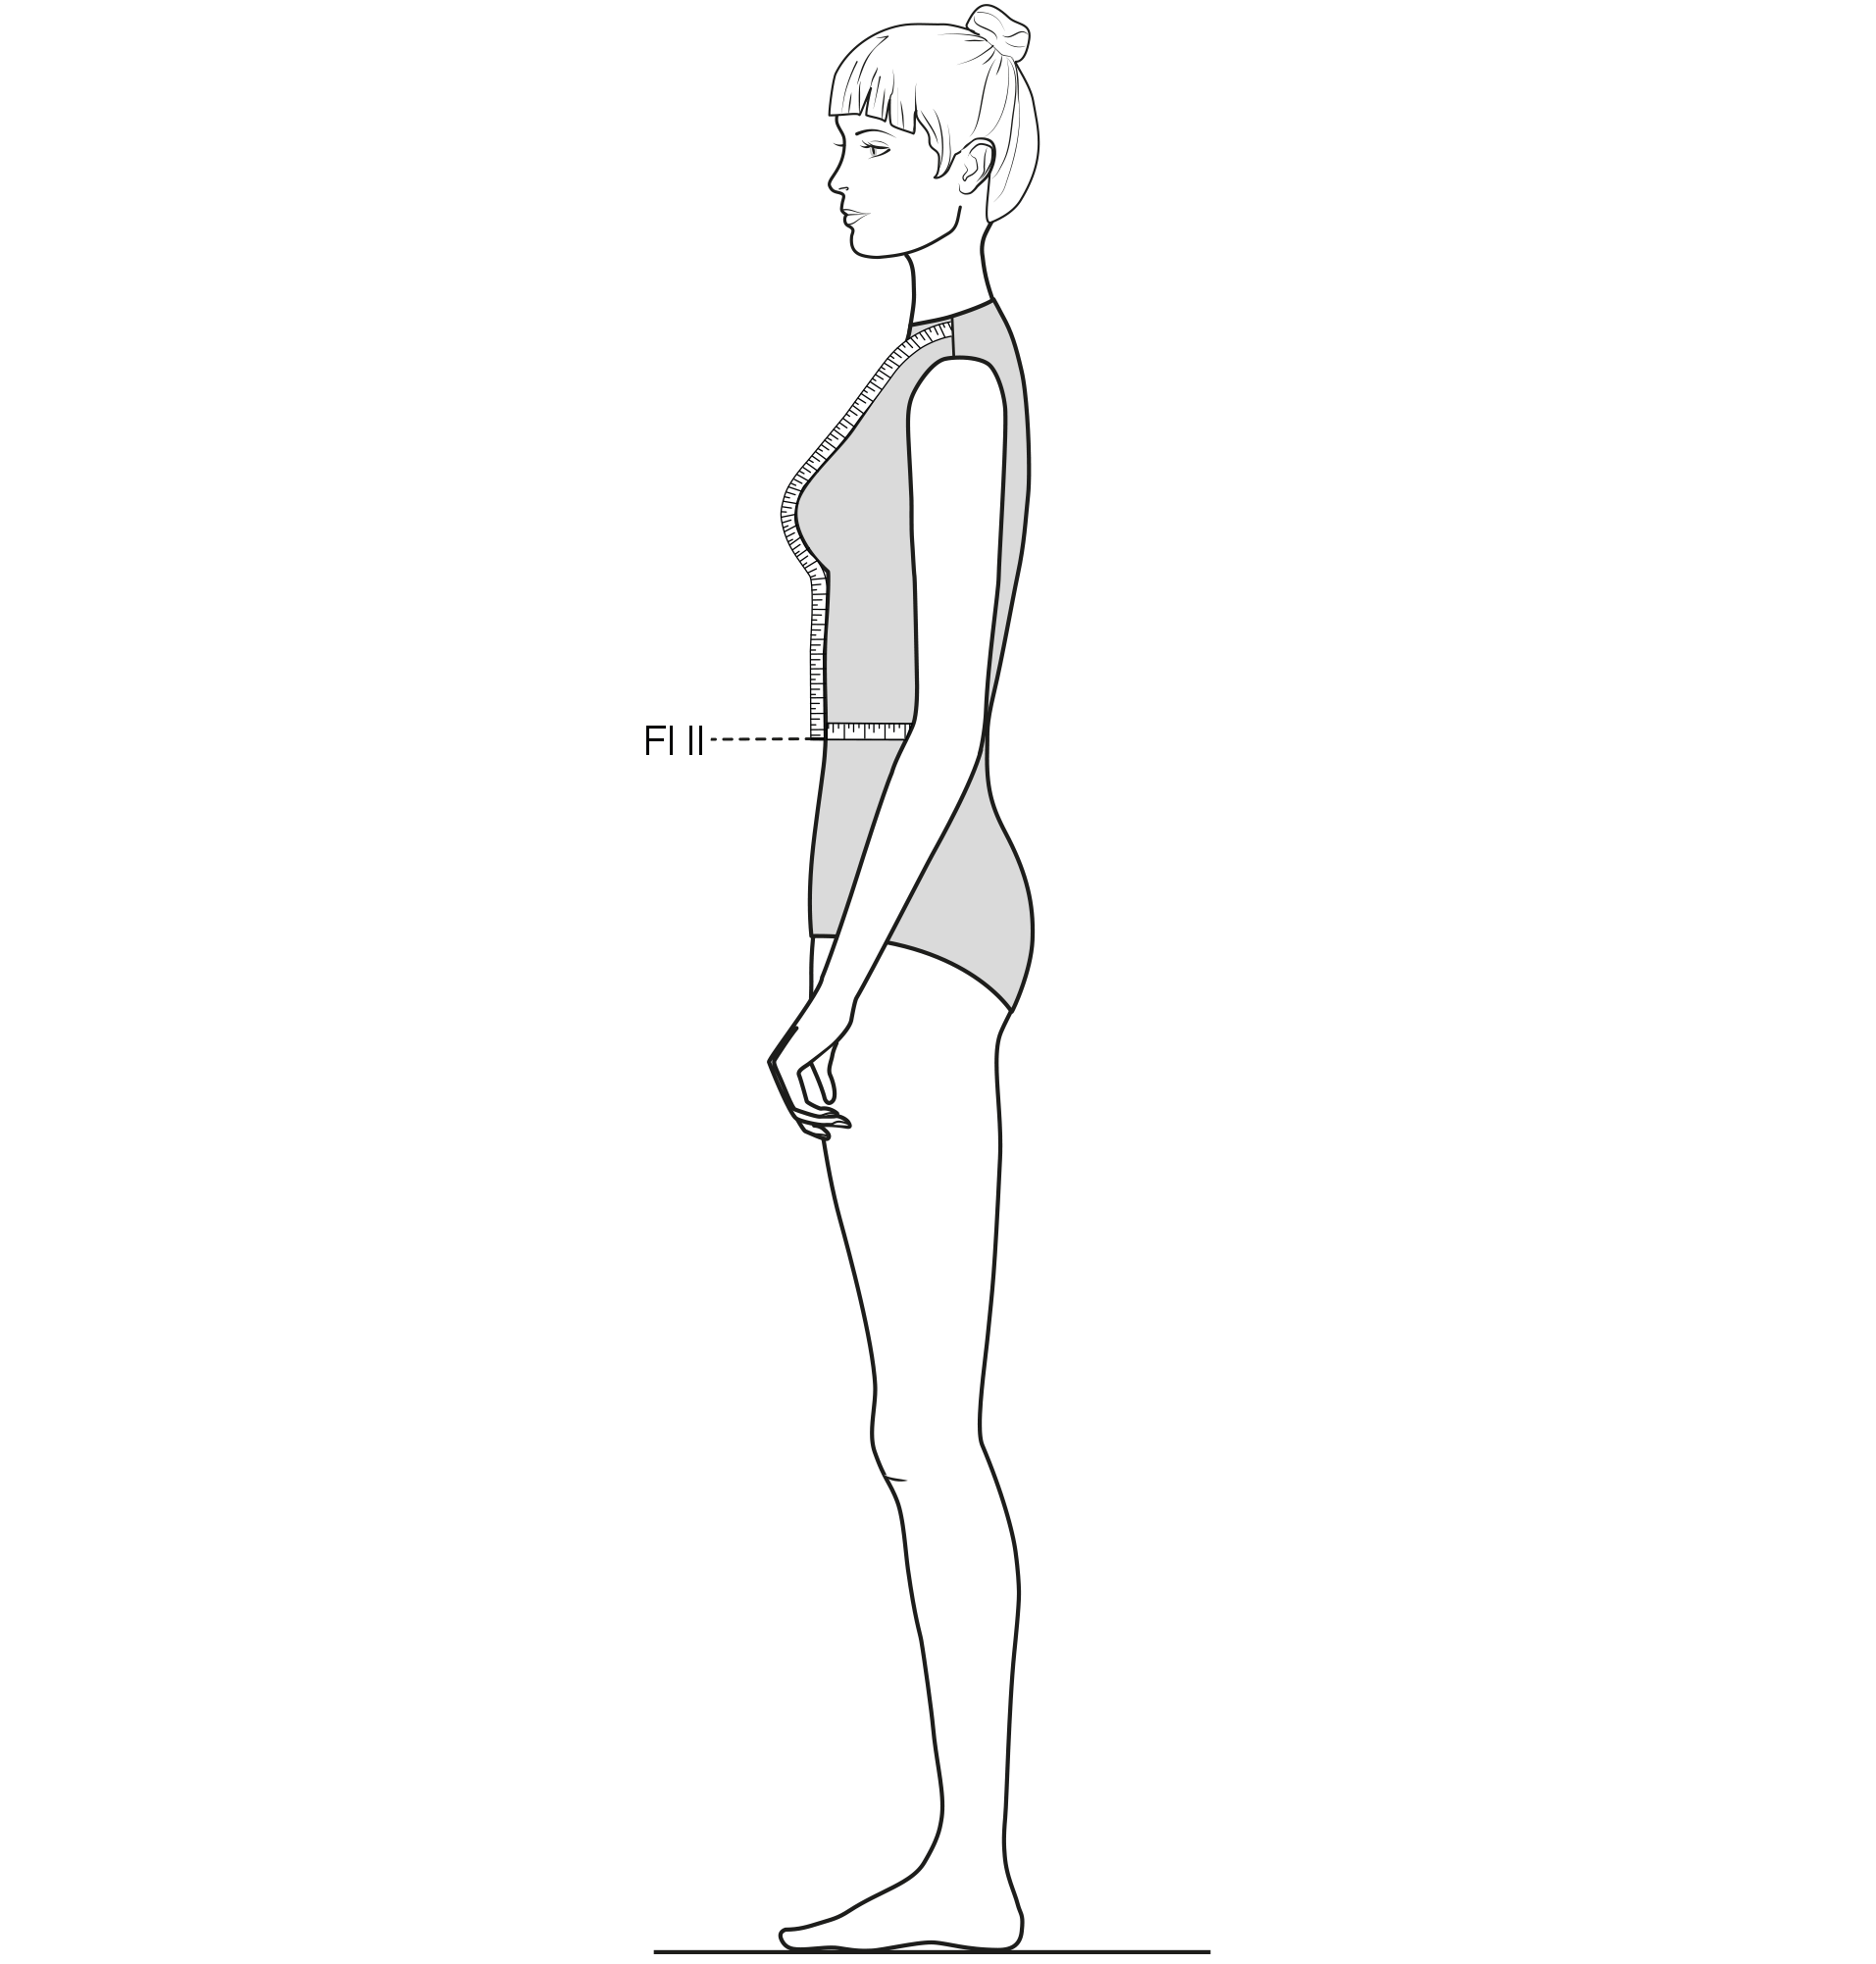 This figure shows the measurement of the Front length